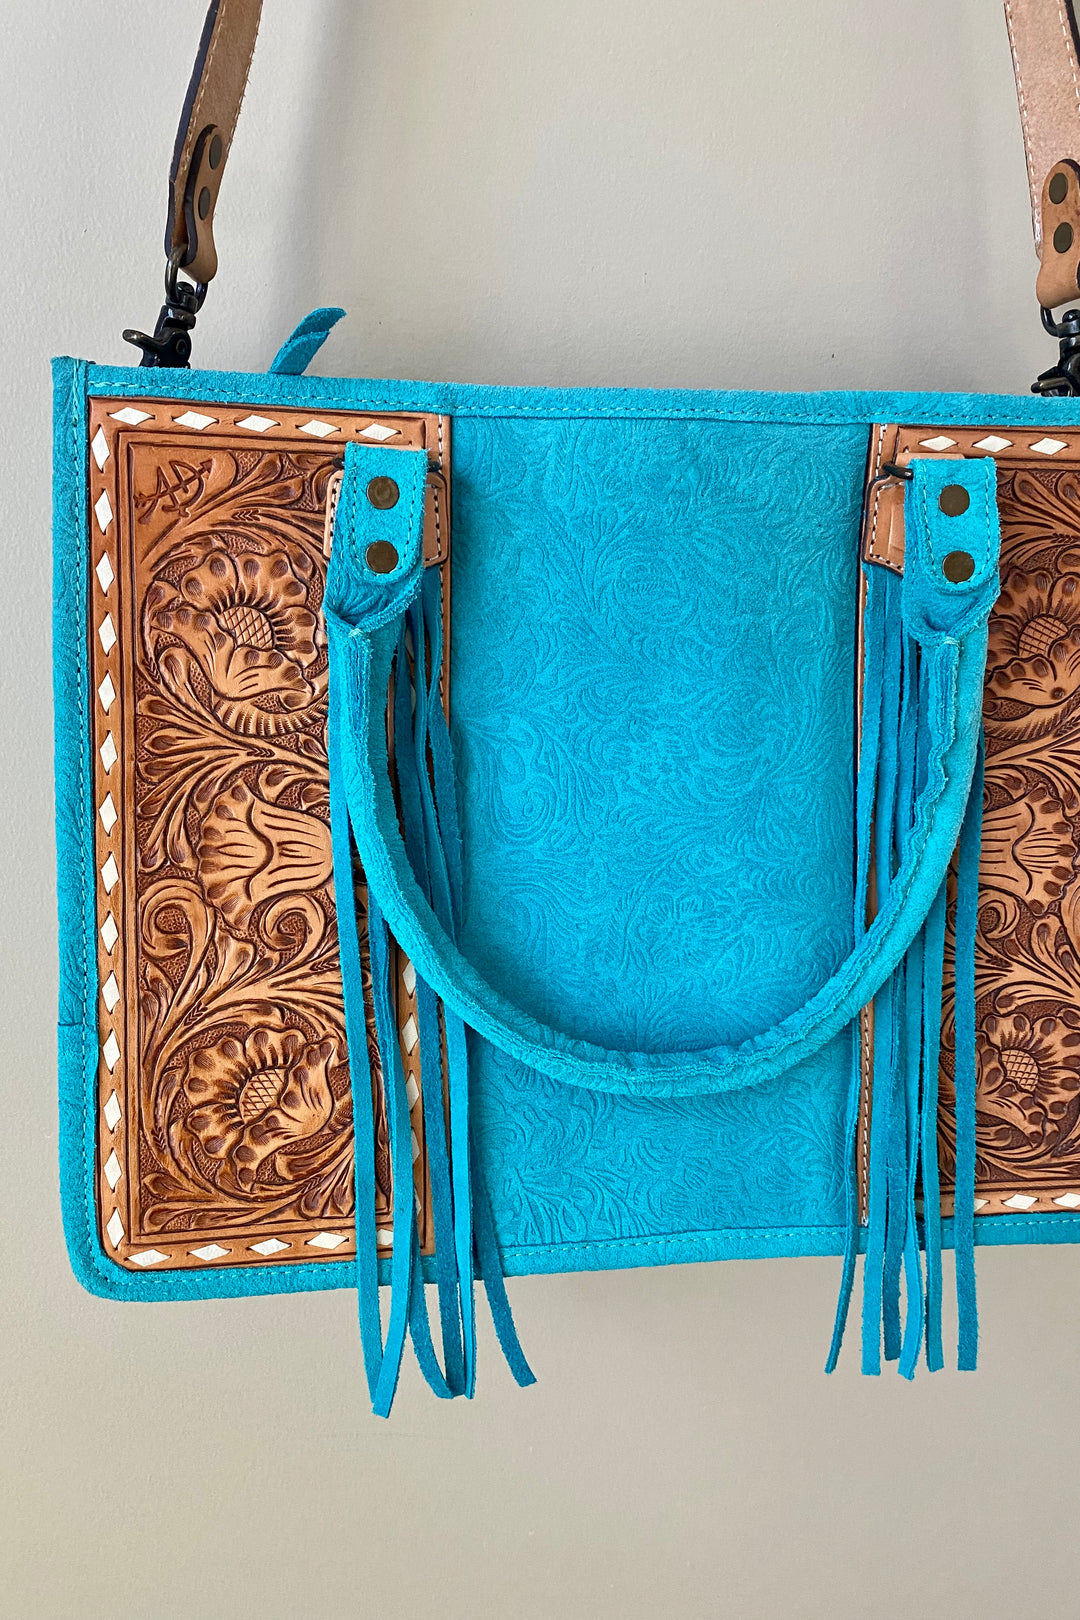 She's An Outlaw Leather Bag - Middle West Apparel